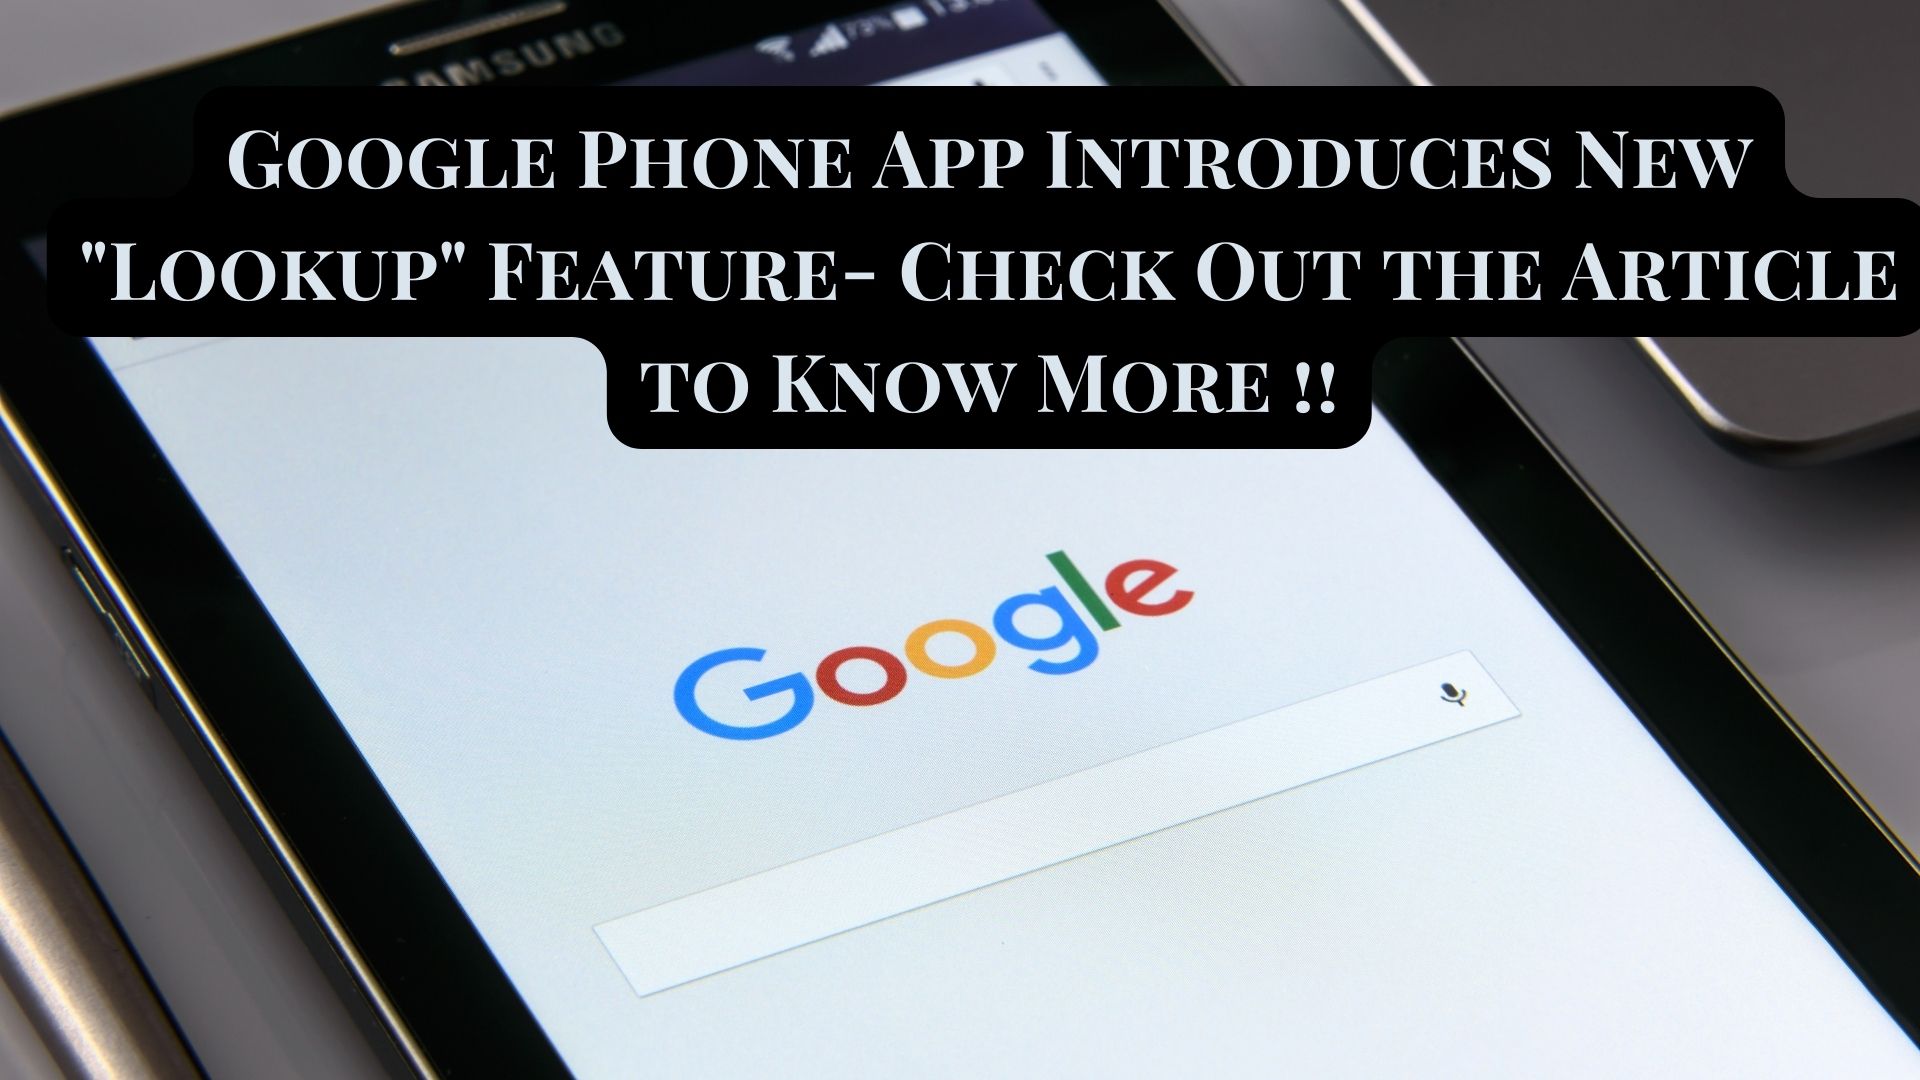 Google Phone App Introduces New "Lookup" Feature- Check Out the Article to Know More !!